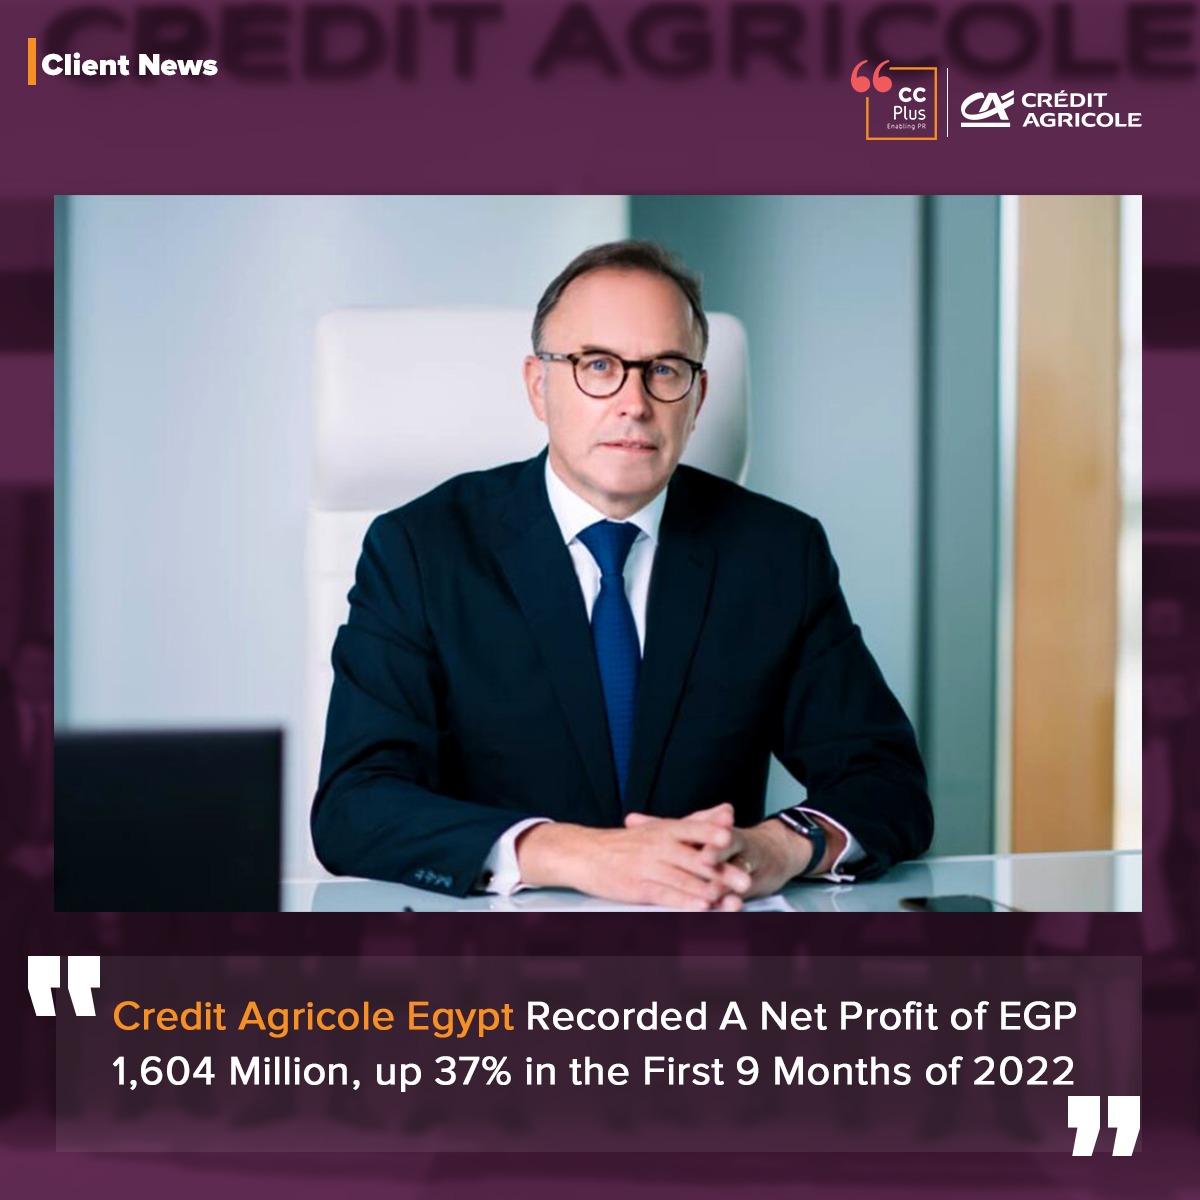 Crédit Agricole Egypt maintains its solid performance through 9 Months of 2022.